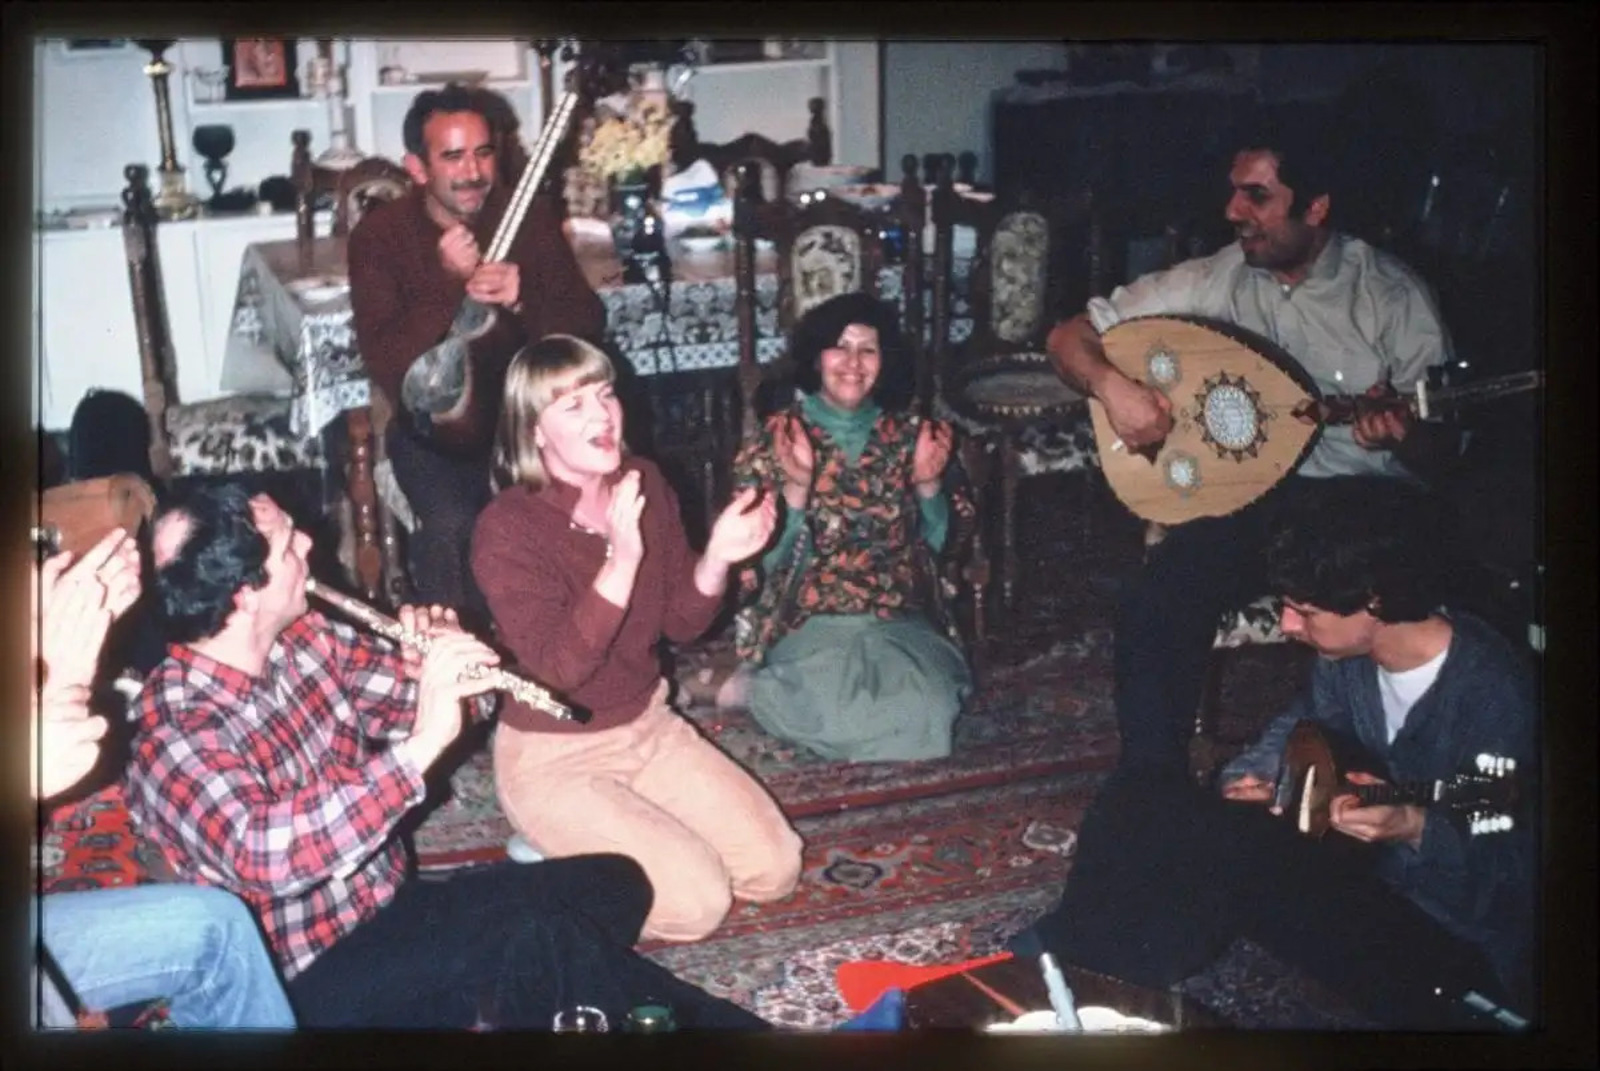 Musician George Totari plays the oud with his band members in an intimate  show at home, in a photo taken from the 1970s.